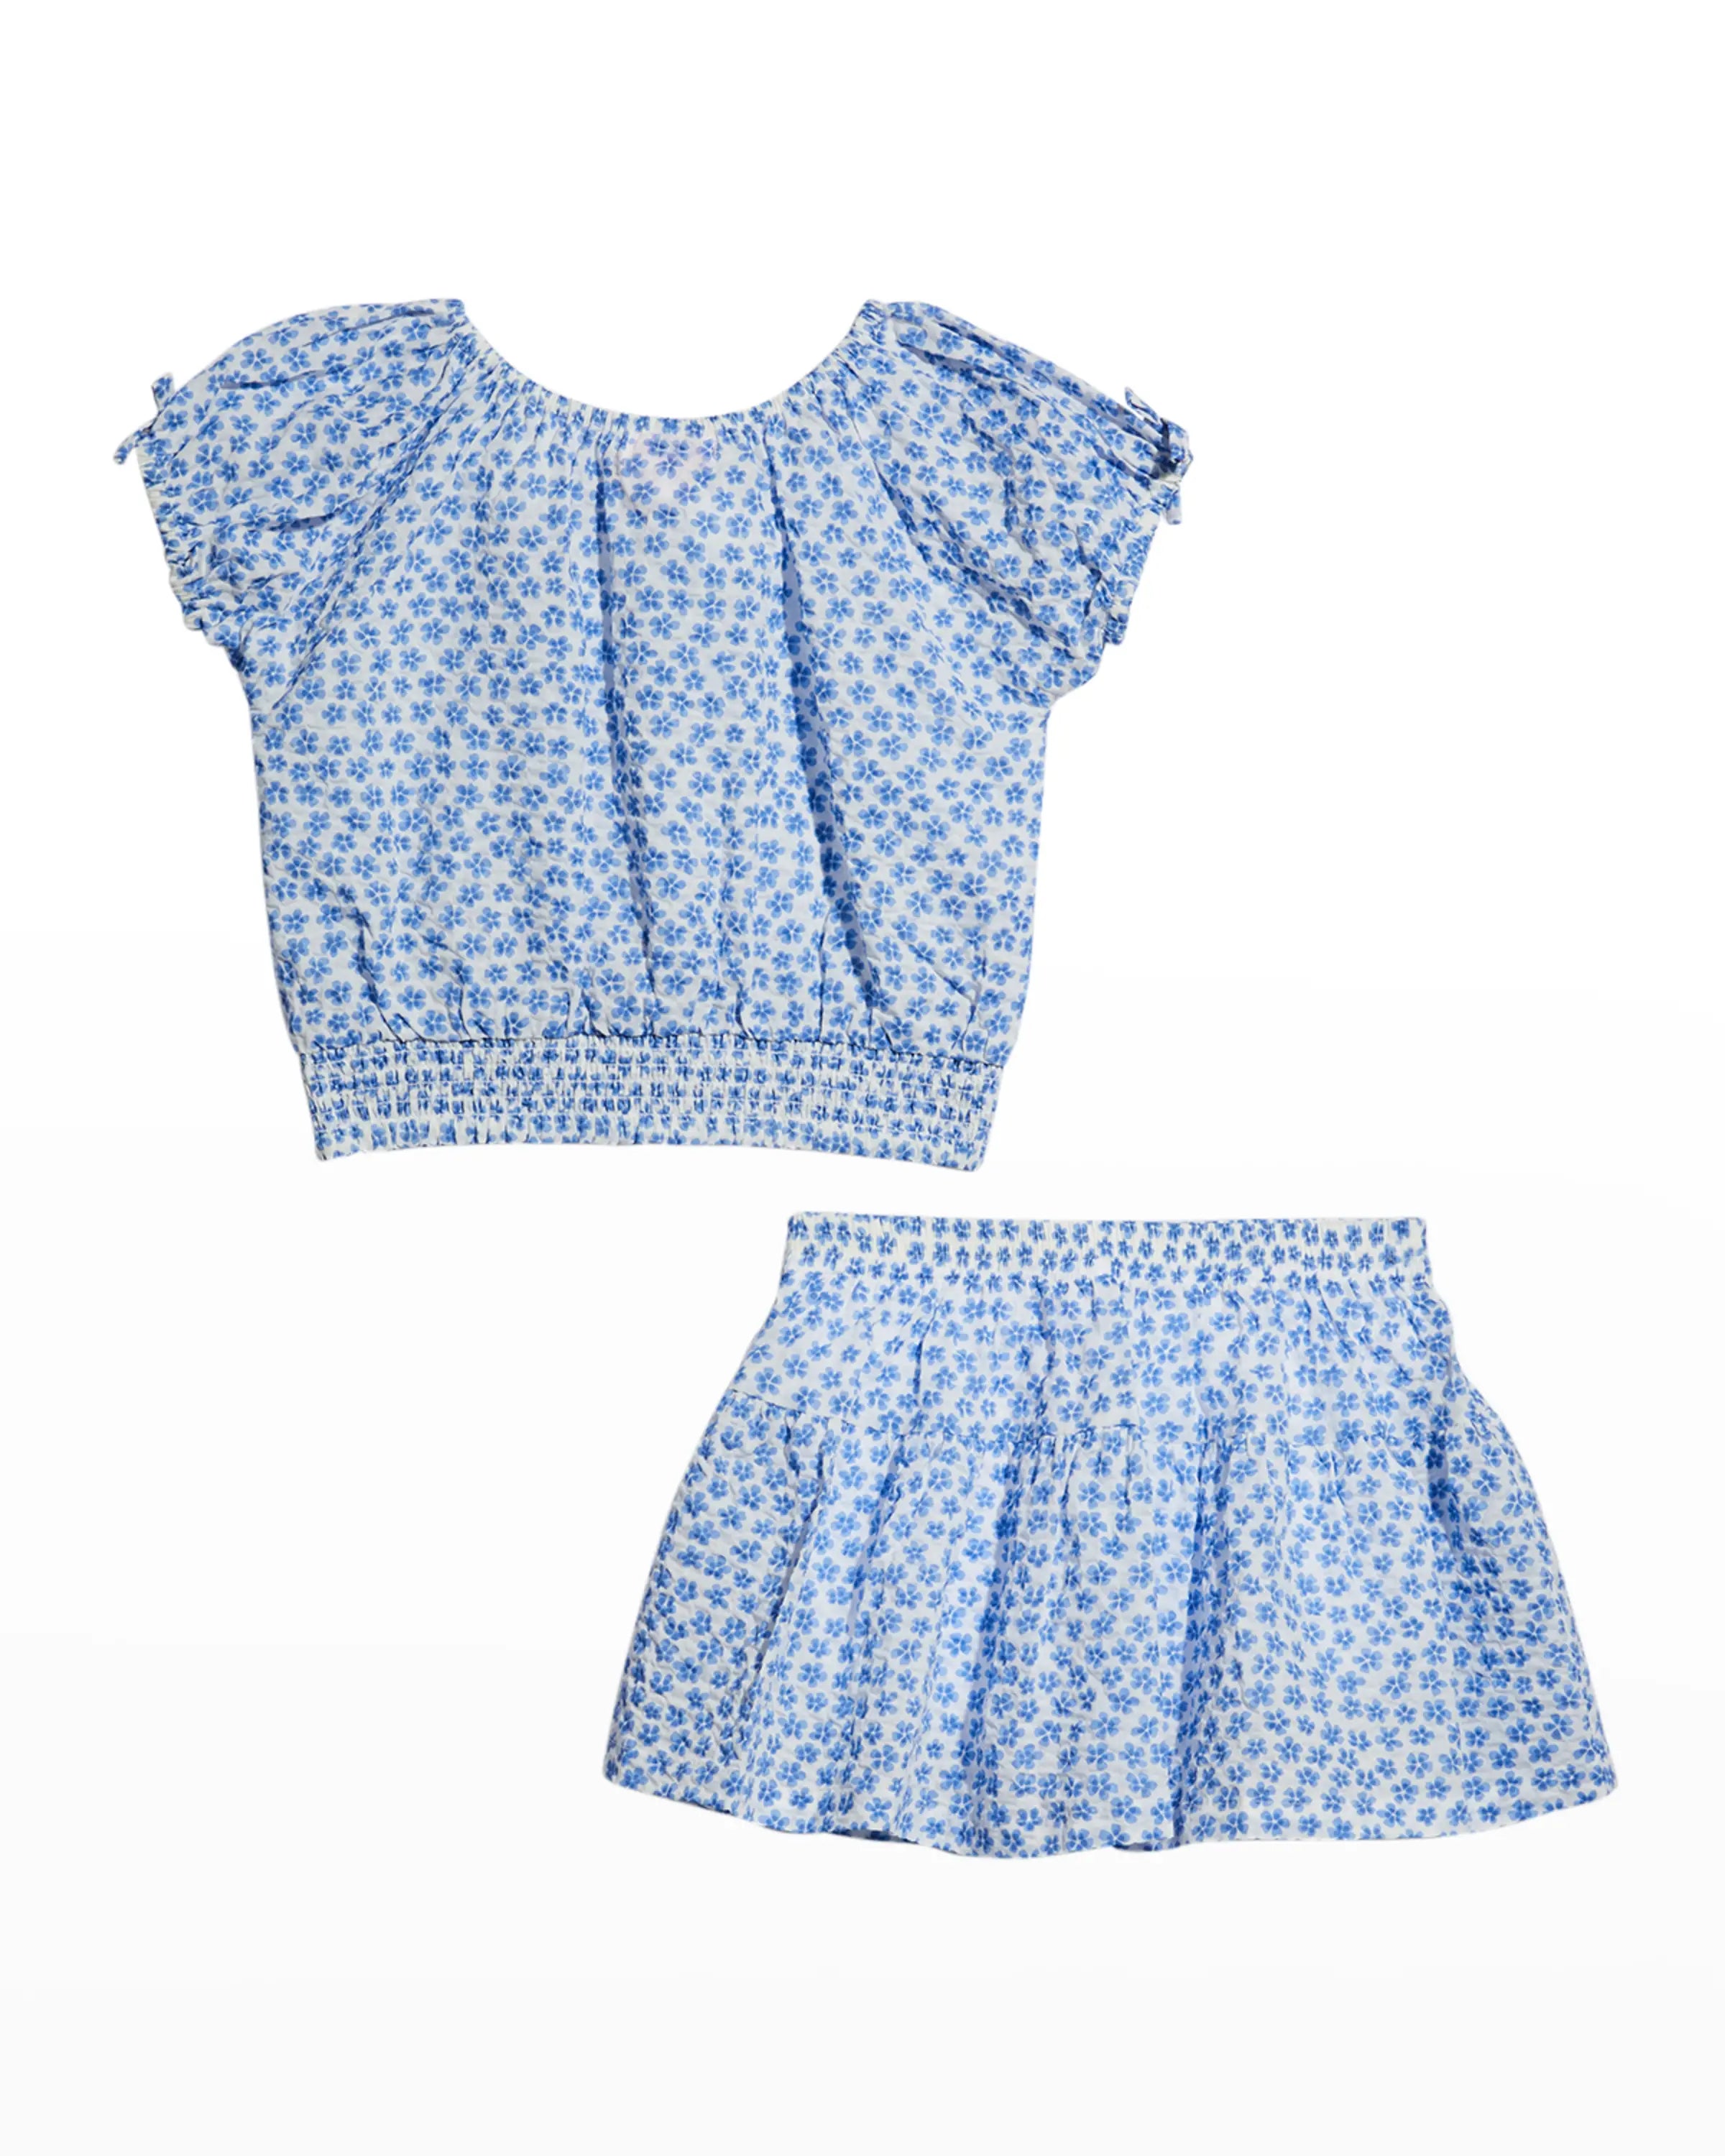 Ditsy Blue Floral Cotton Skirt Set - Twinkle Twinkle Little One